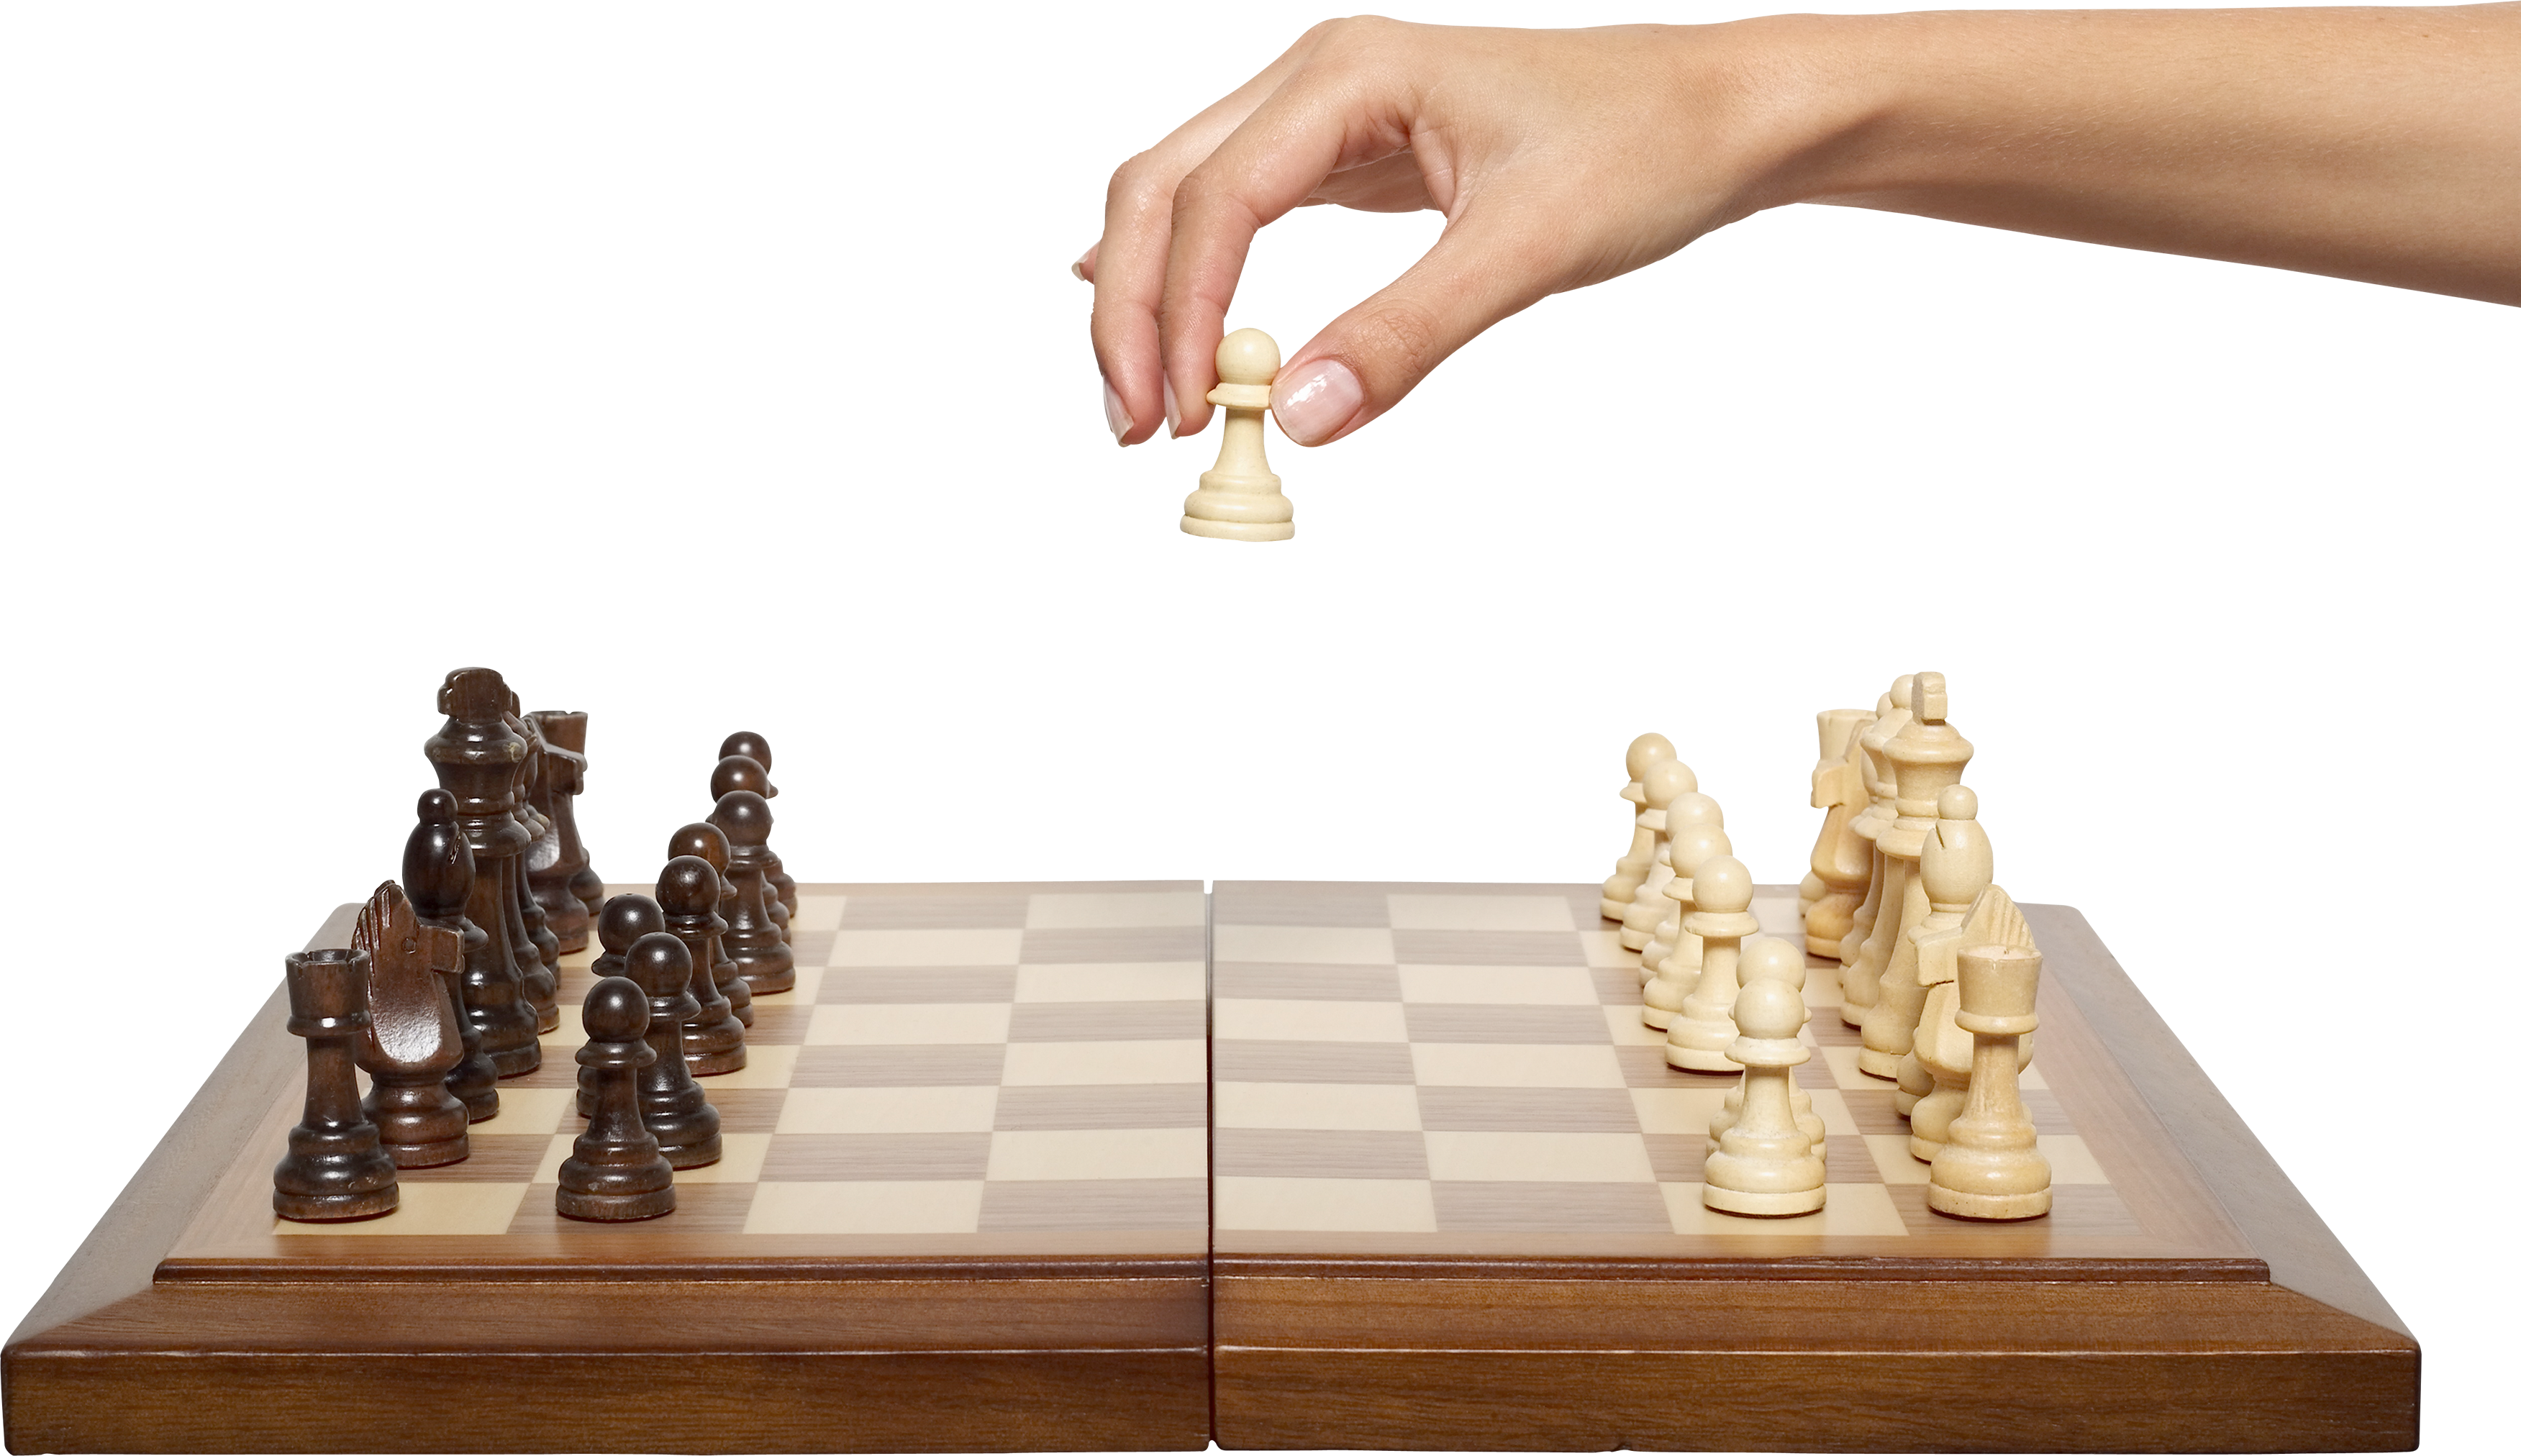 HD wallpaper: background, the game, hand, chess